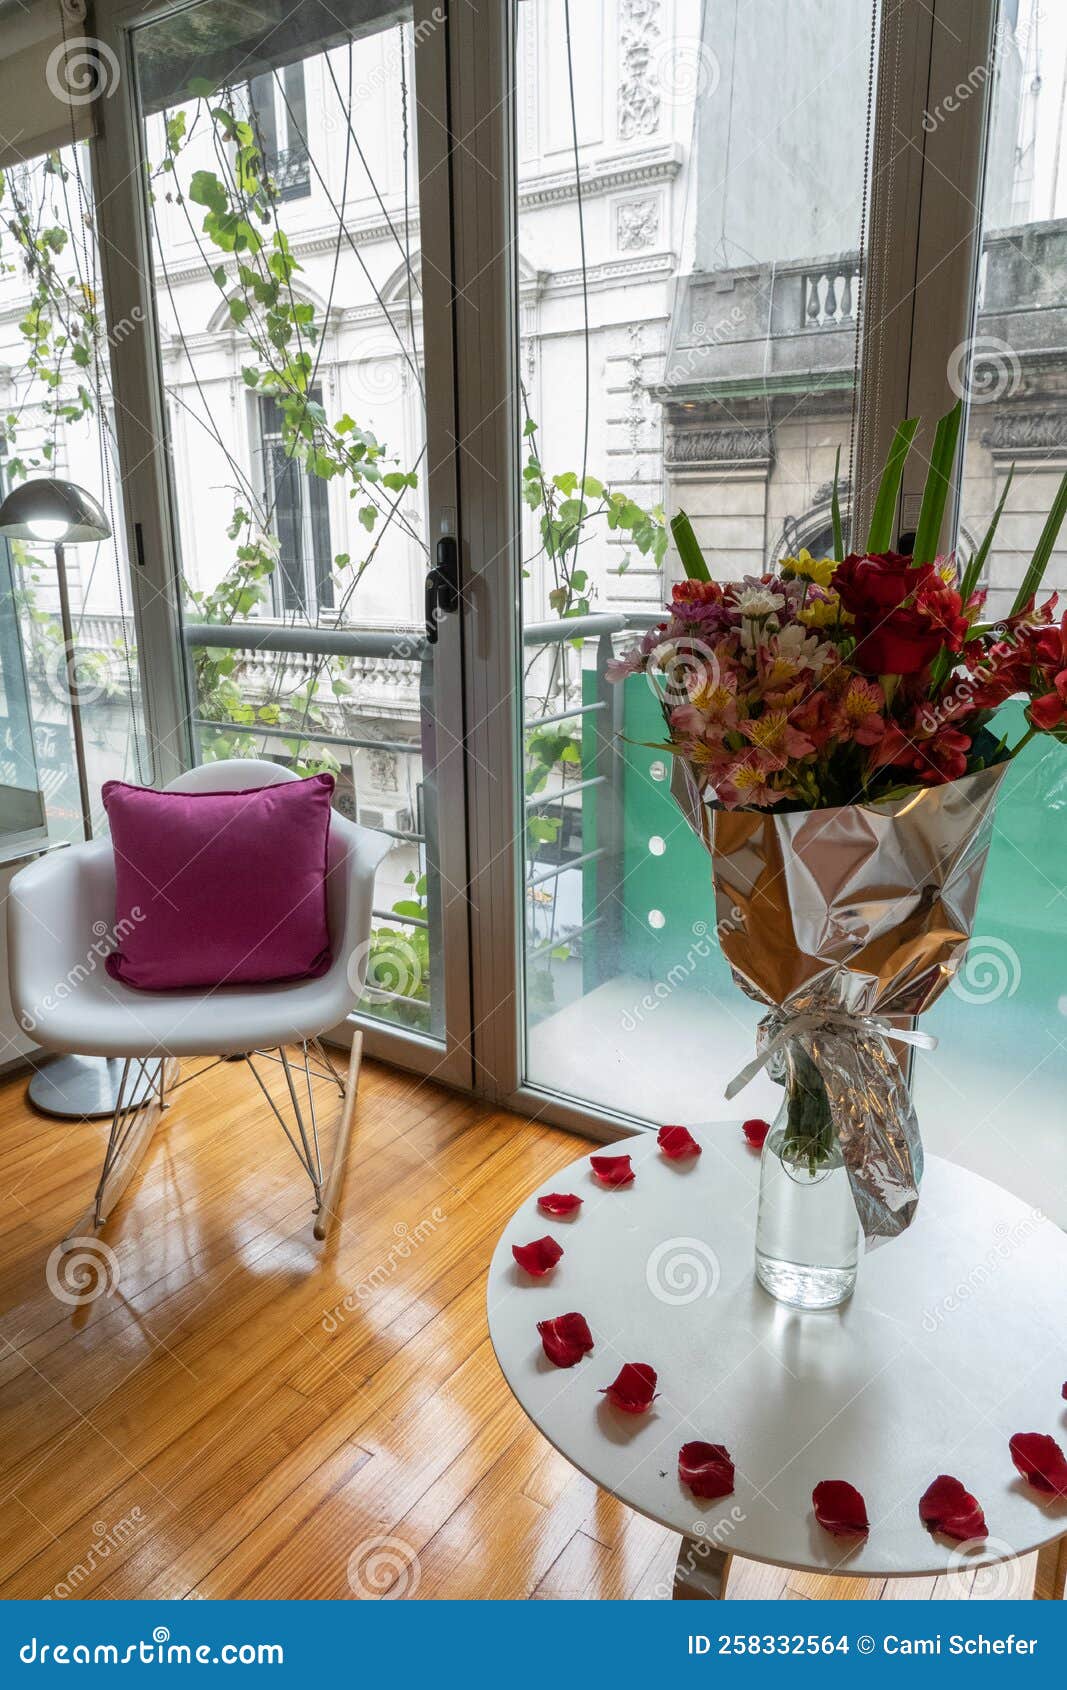 Decoration with Rose Petals on the Floor of an Elegant and ...